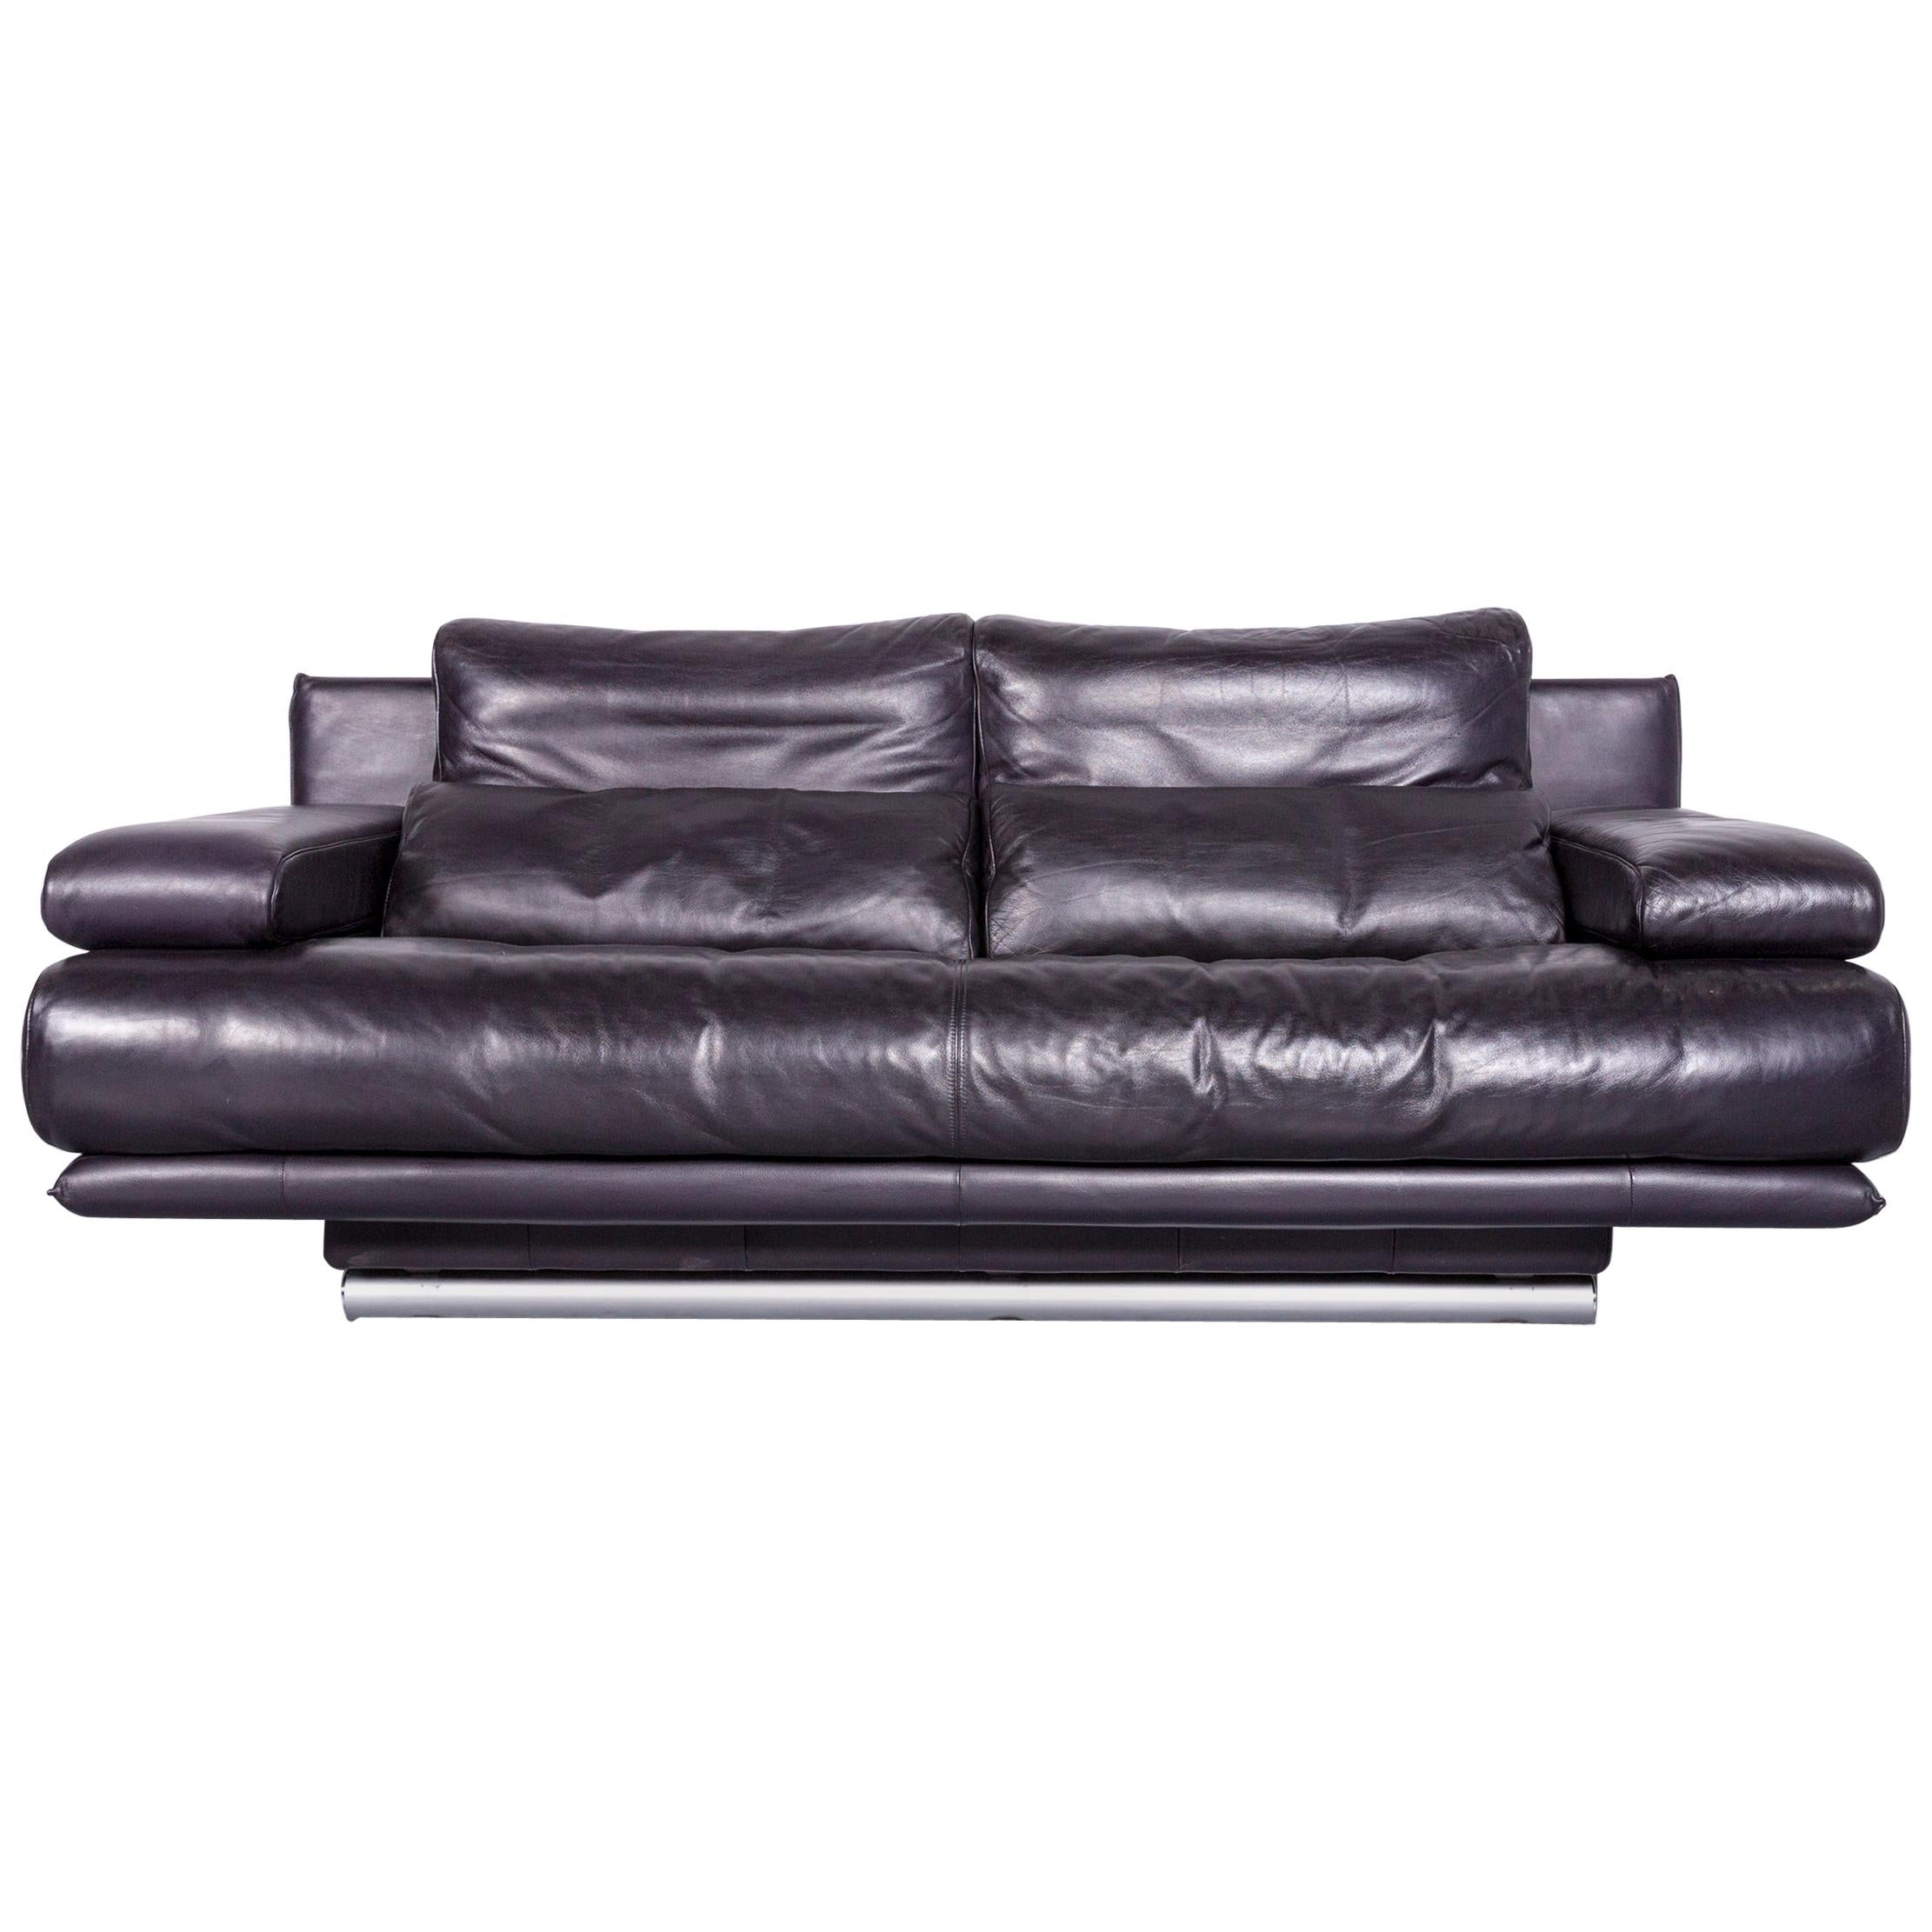 Rolf Benz 6500 Designer Leather Sofa Purple Genuine Leather Two-Seat Couch For Sale